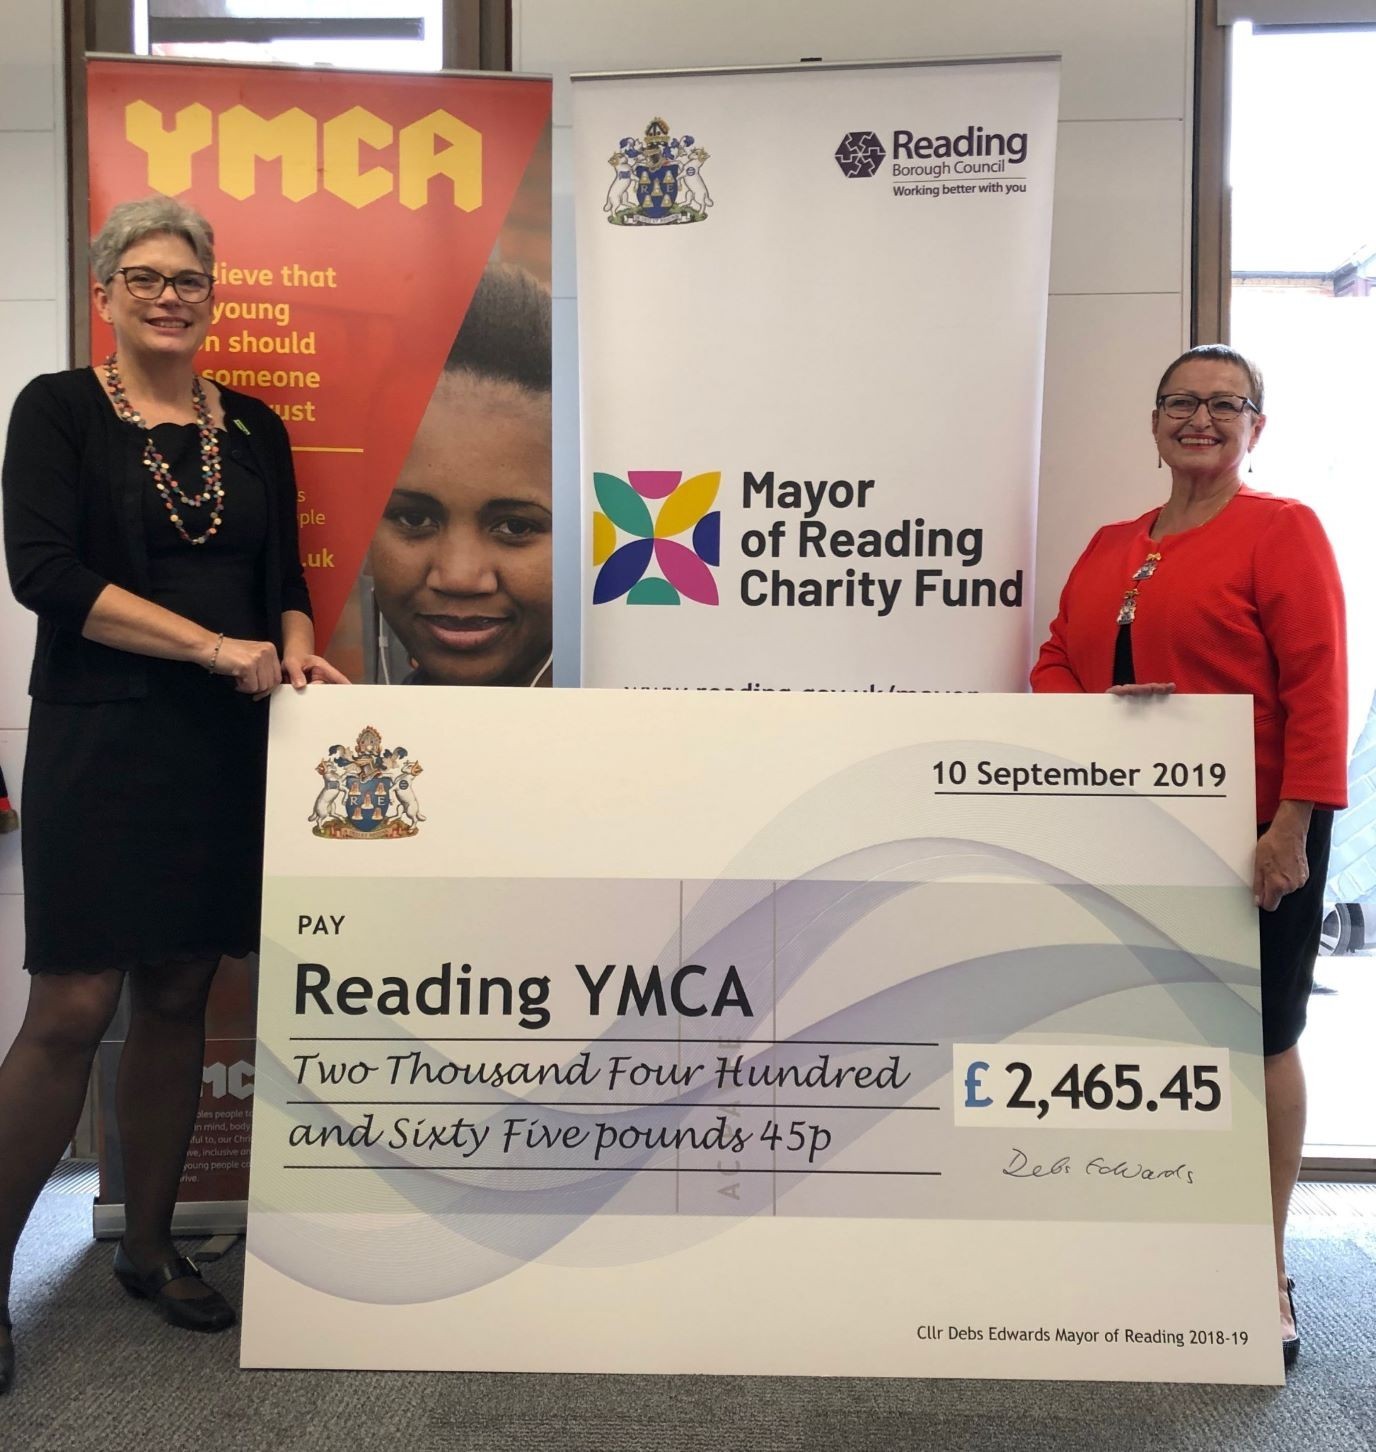 YMCA Reading receive cheque from Mayor of Reading Charity Fund